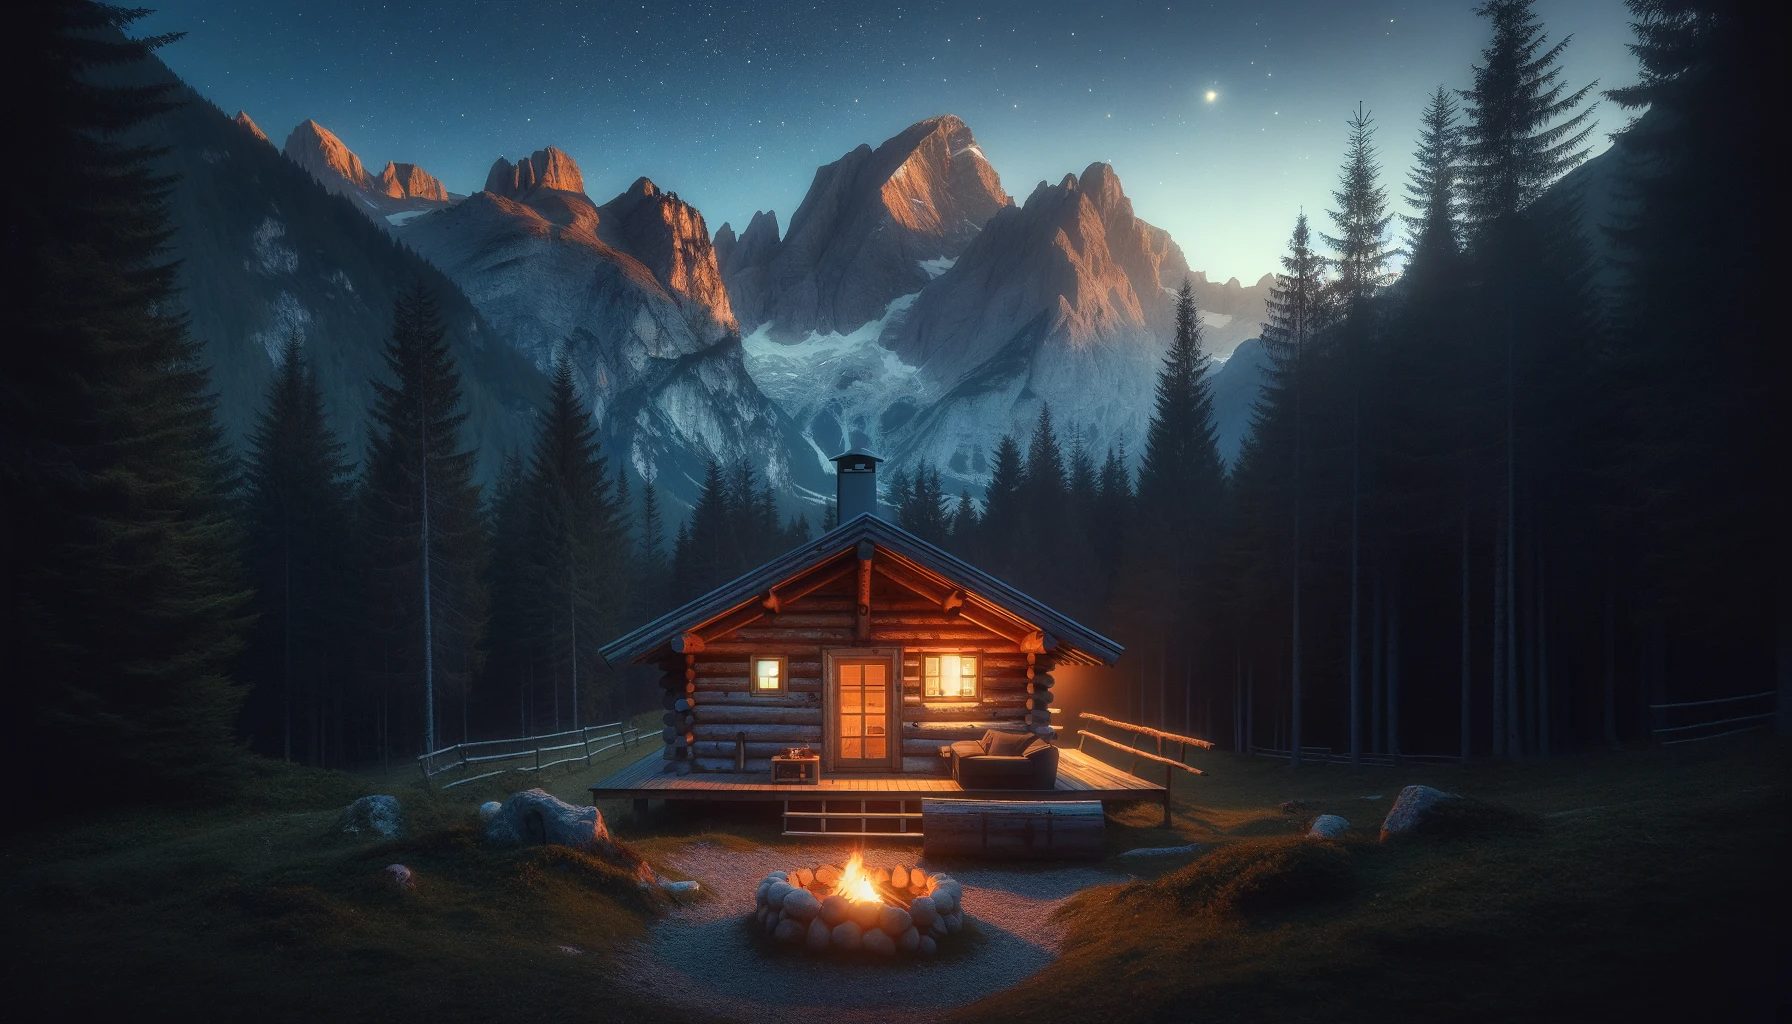 Cozy mountain cabin at dusk with lit campfire.